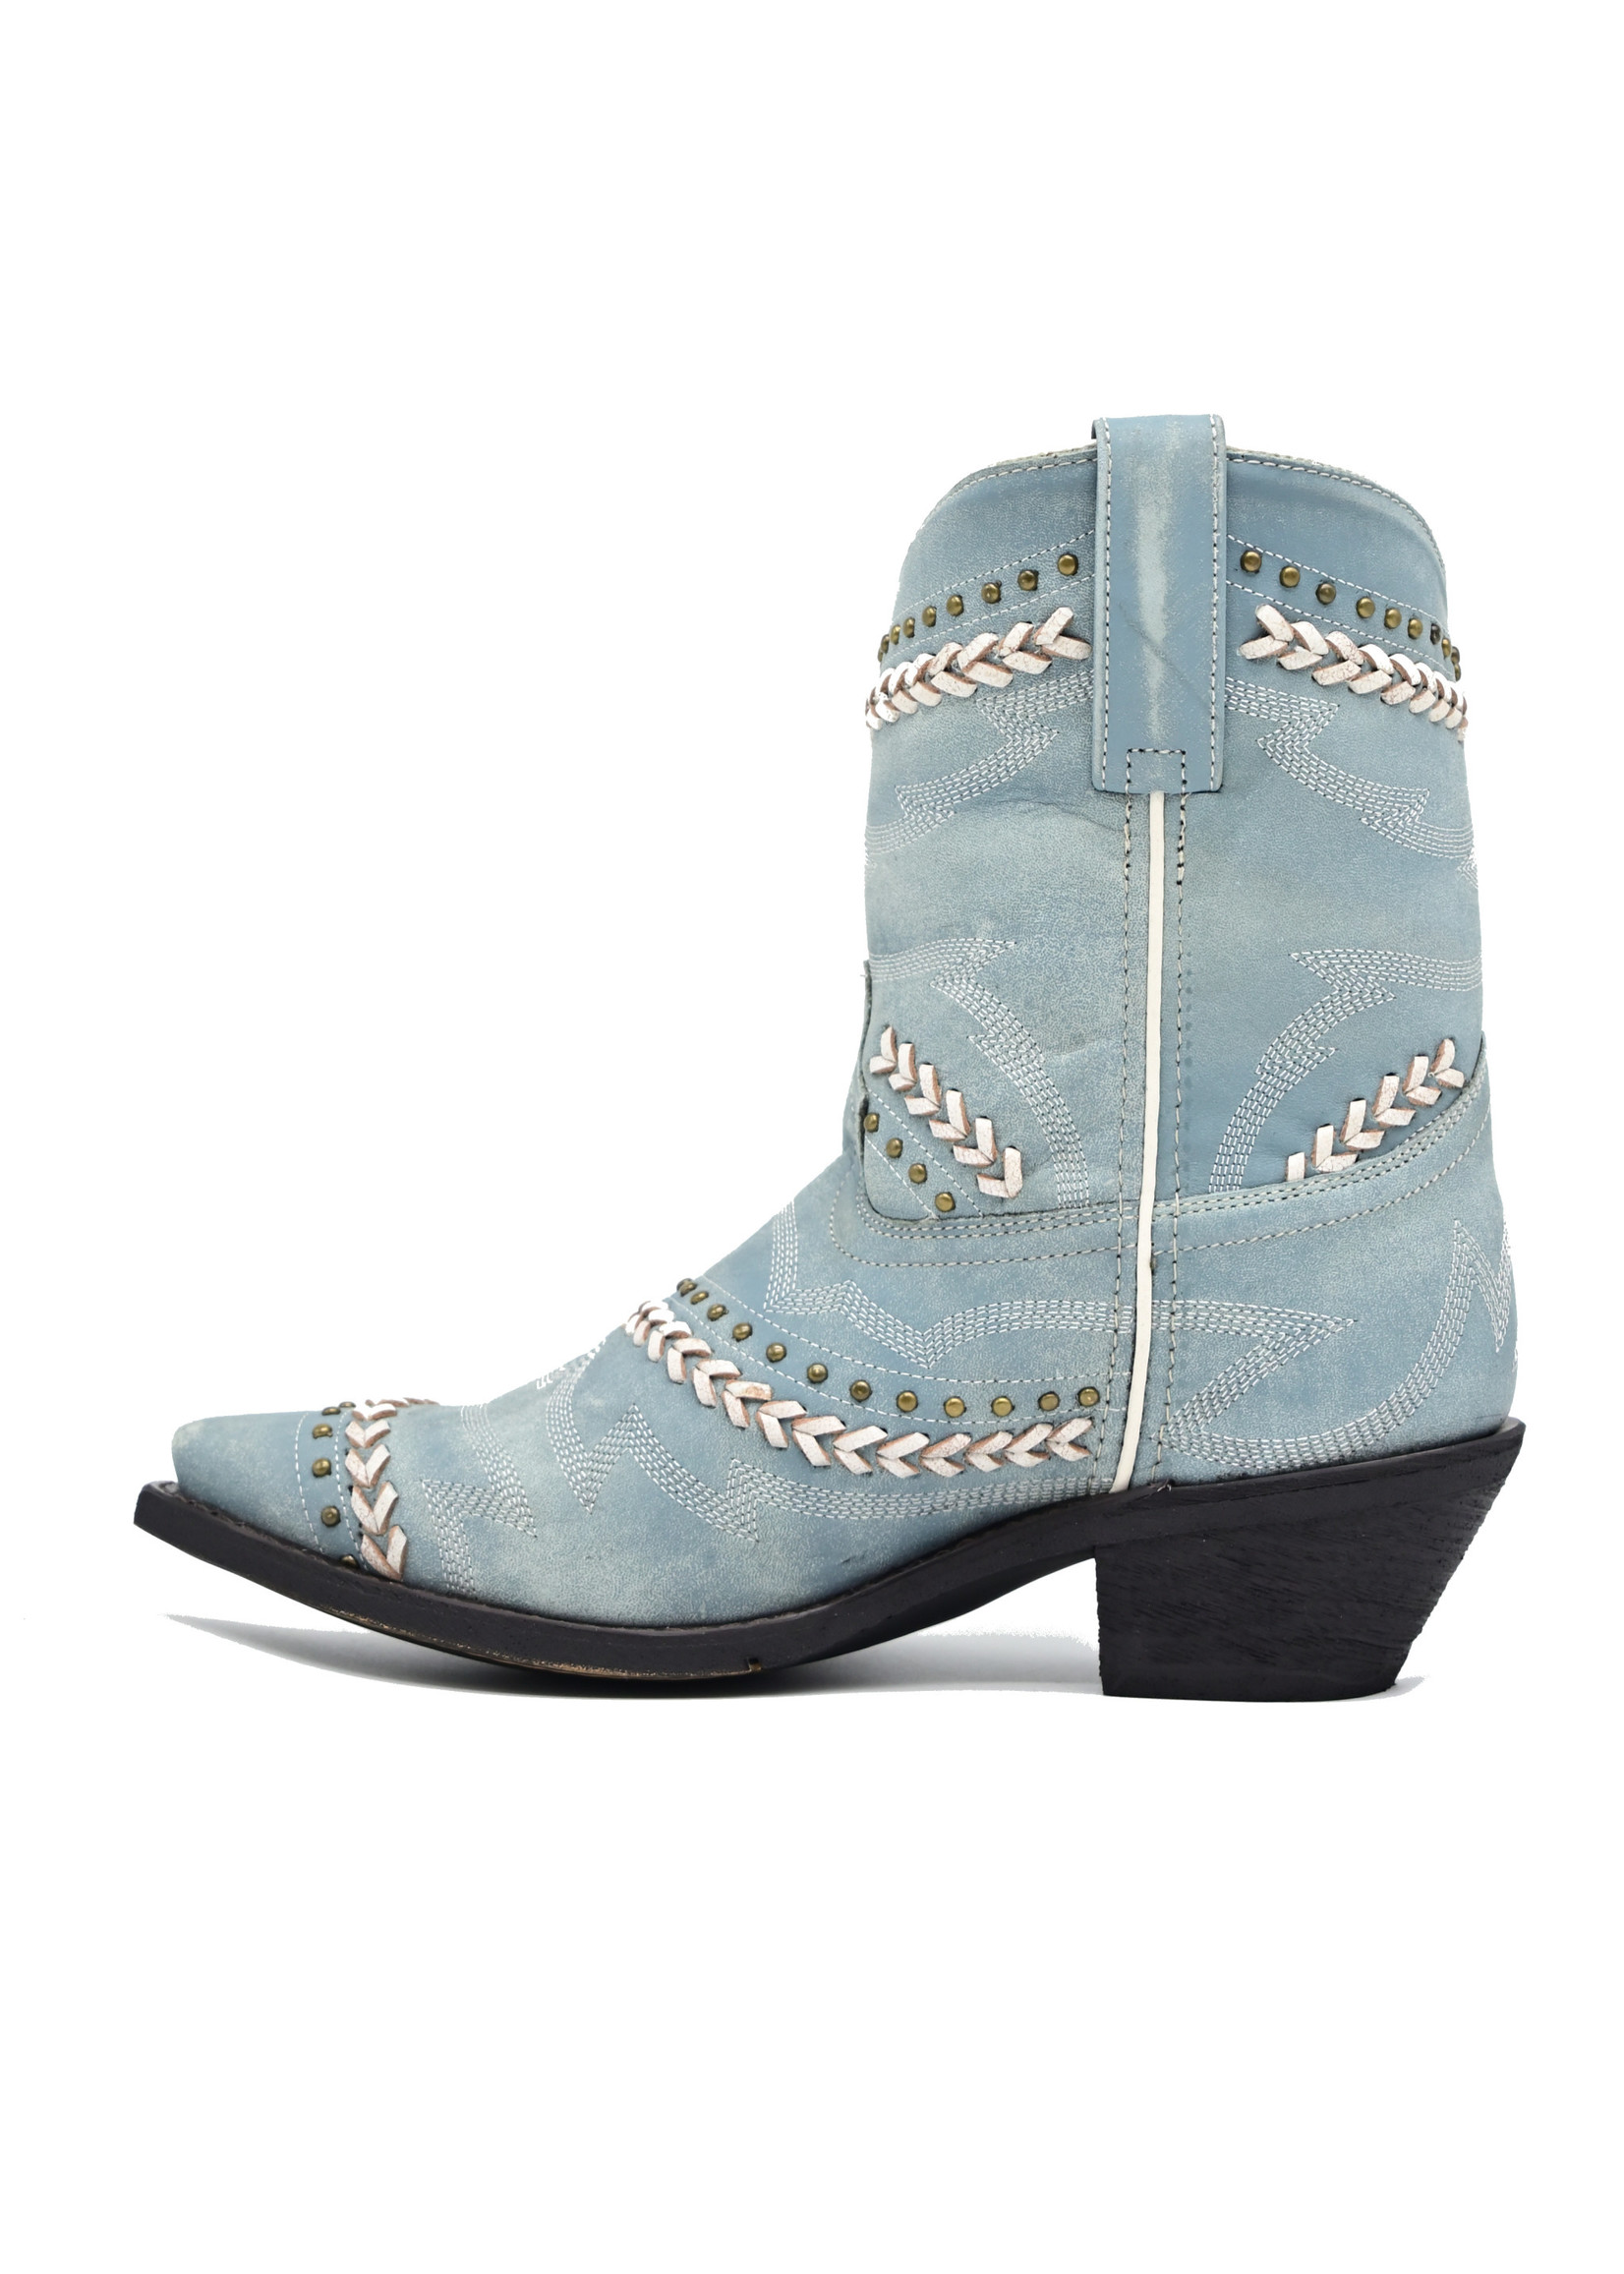 Laredo 52401 - Sky Blue Boots with Studs